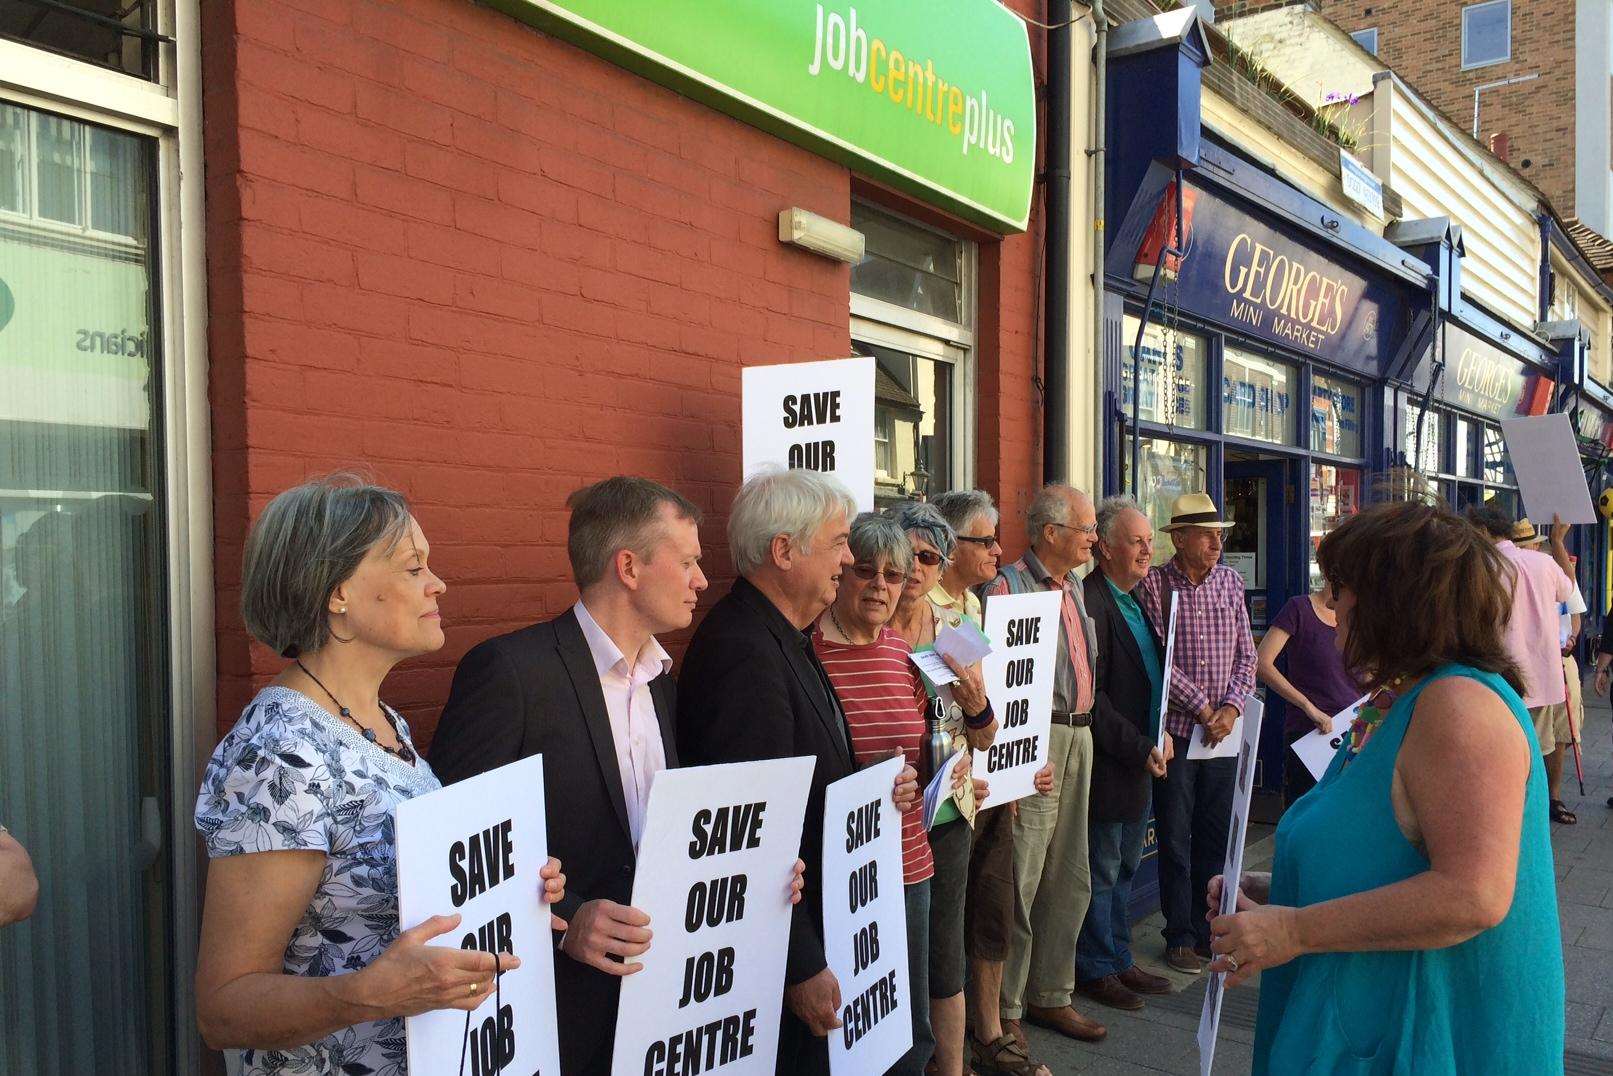 The protest was held outside the High Street office